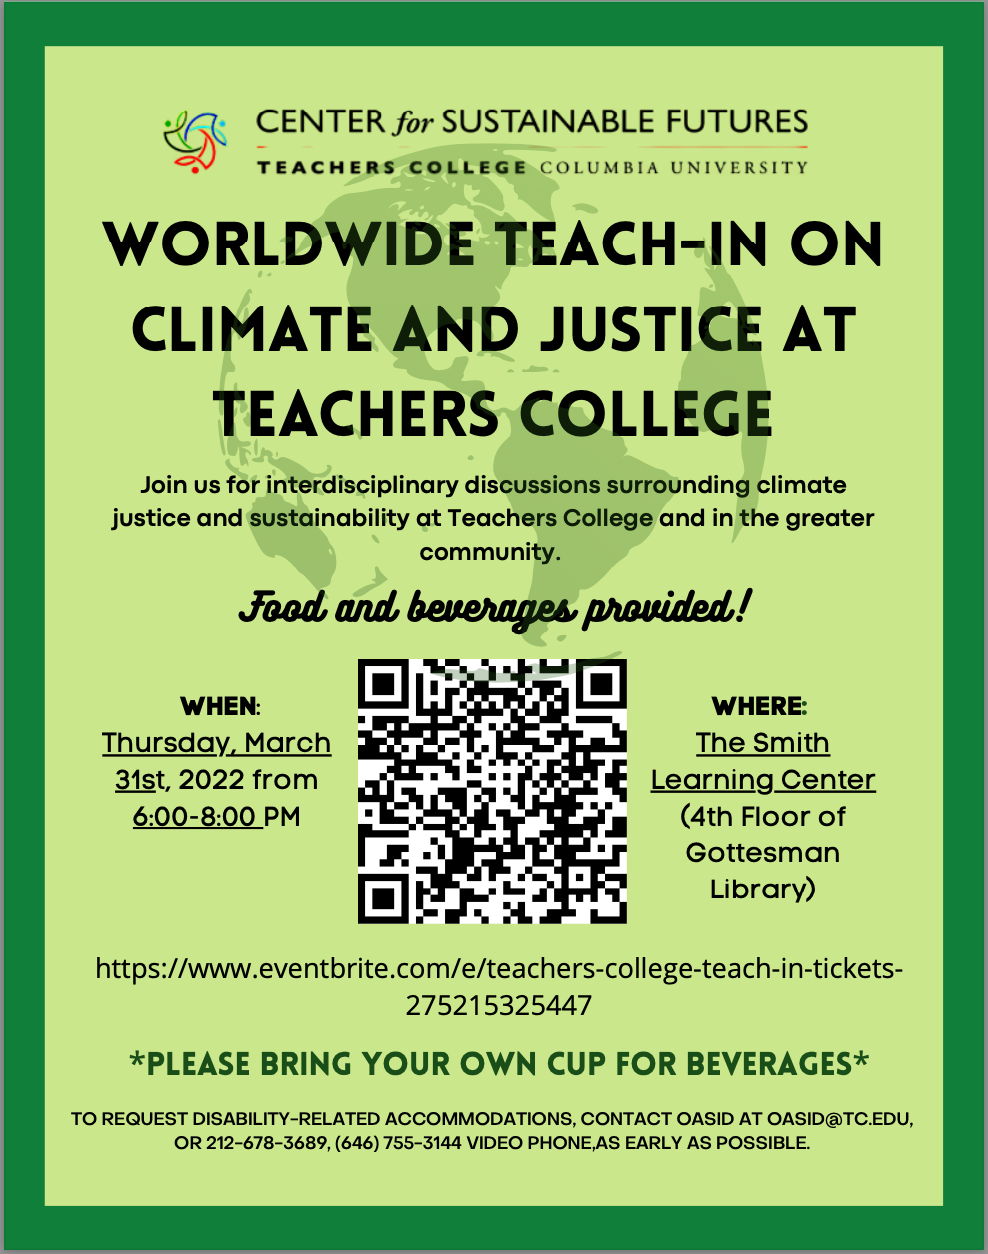 Event Flyer for TC Teach-In on Climate and Justice; For more details, refer to the event descriptions below.